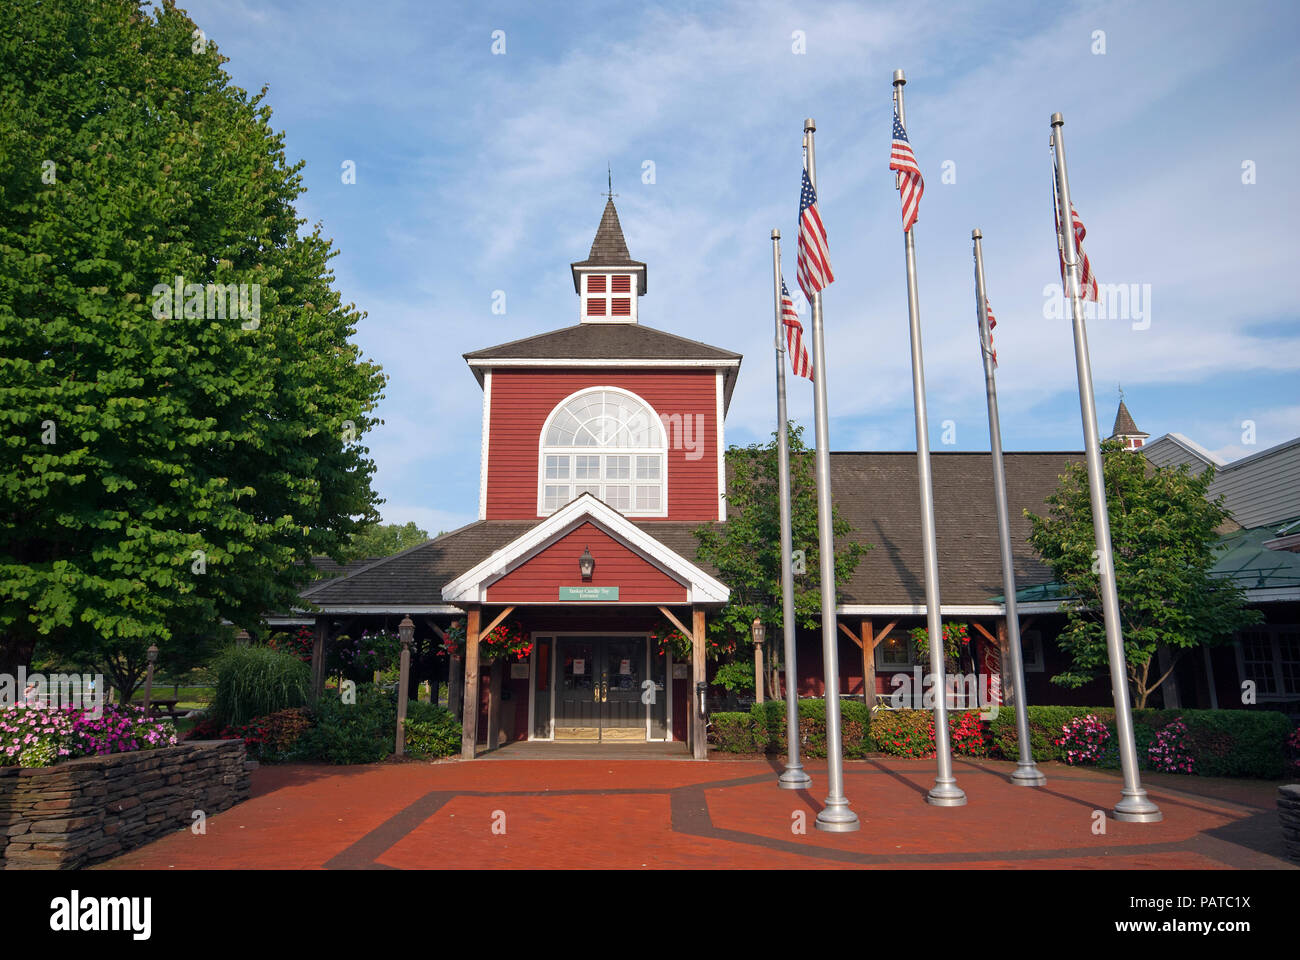 Yankee Candle Village Store, South Deerfield, Franklin County, Massachusetts, USA Stock Photo